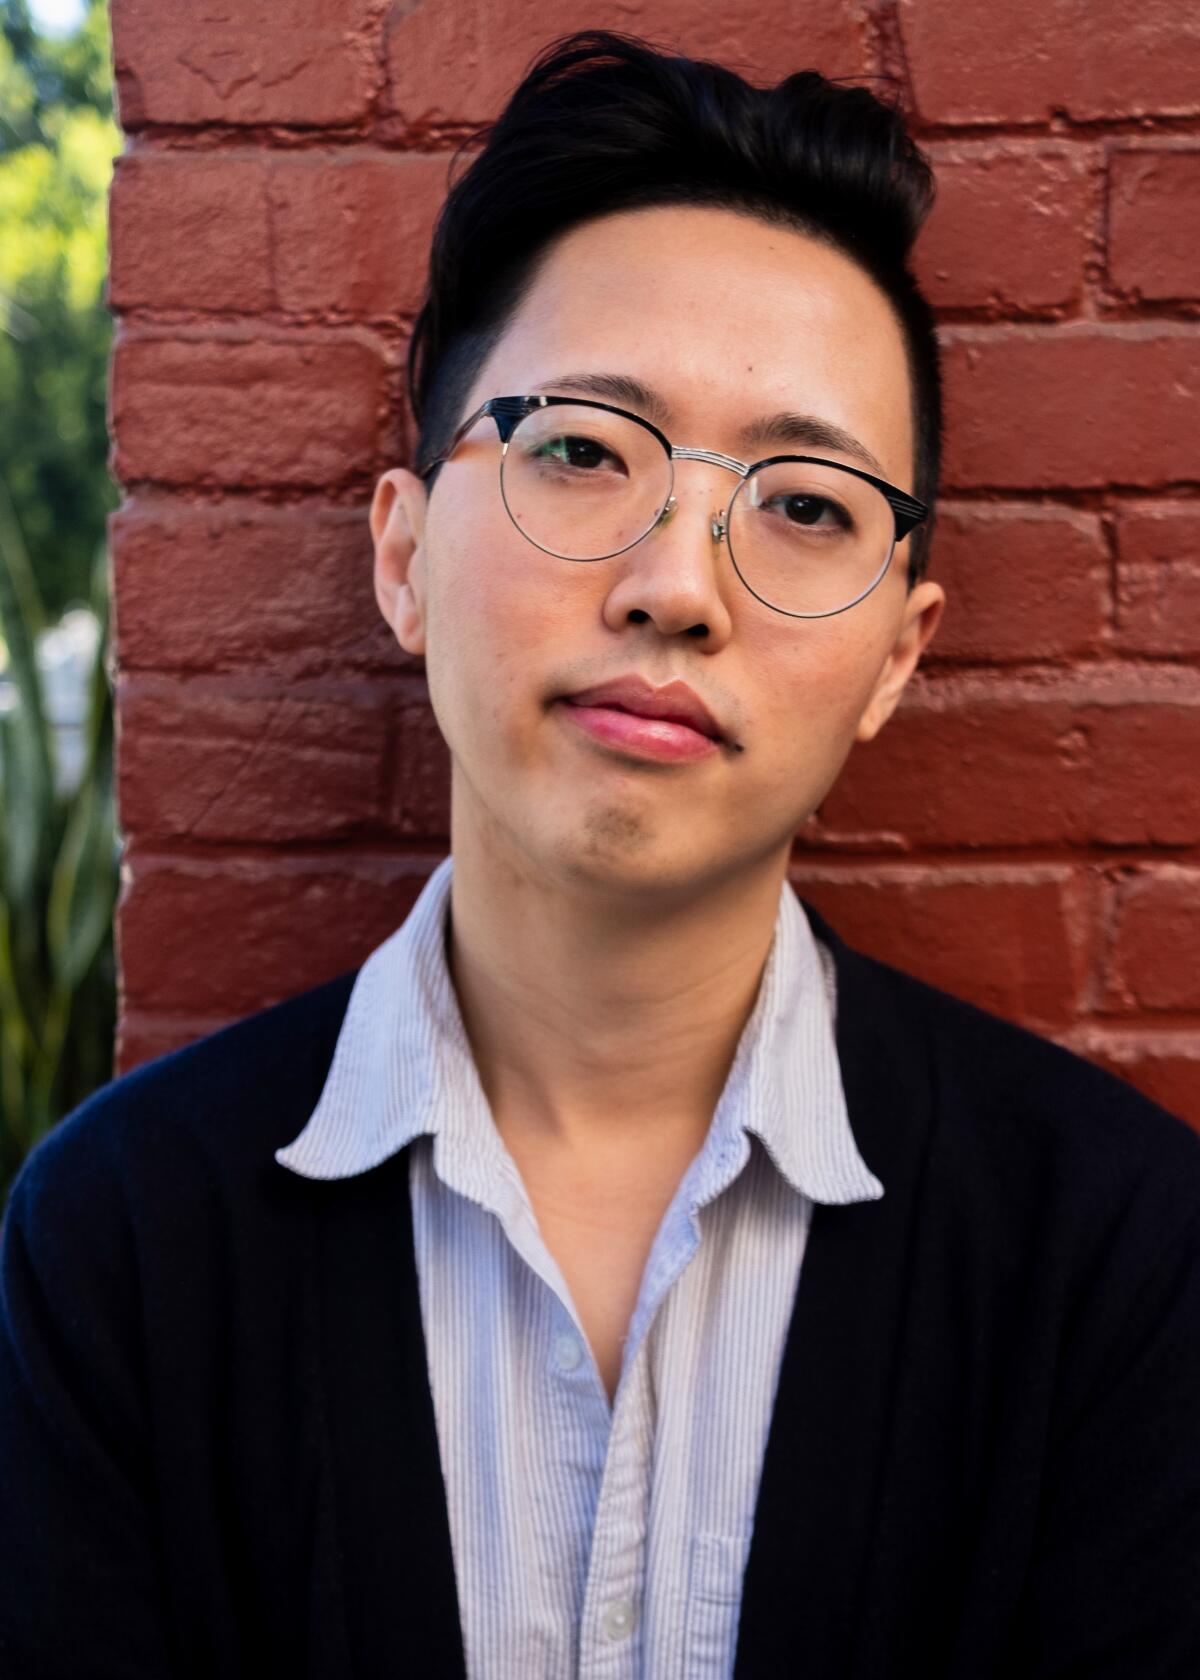 A headshot of a person with glasses leaning against a brick wall.